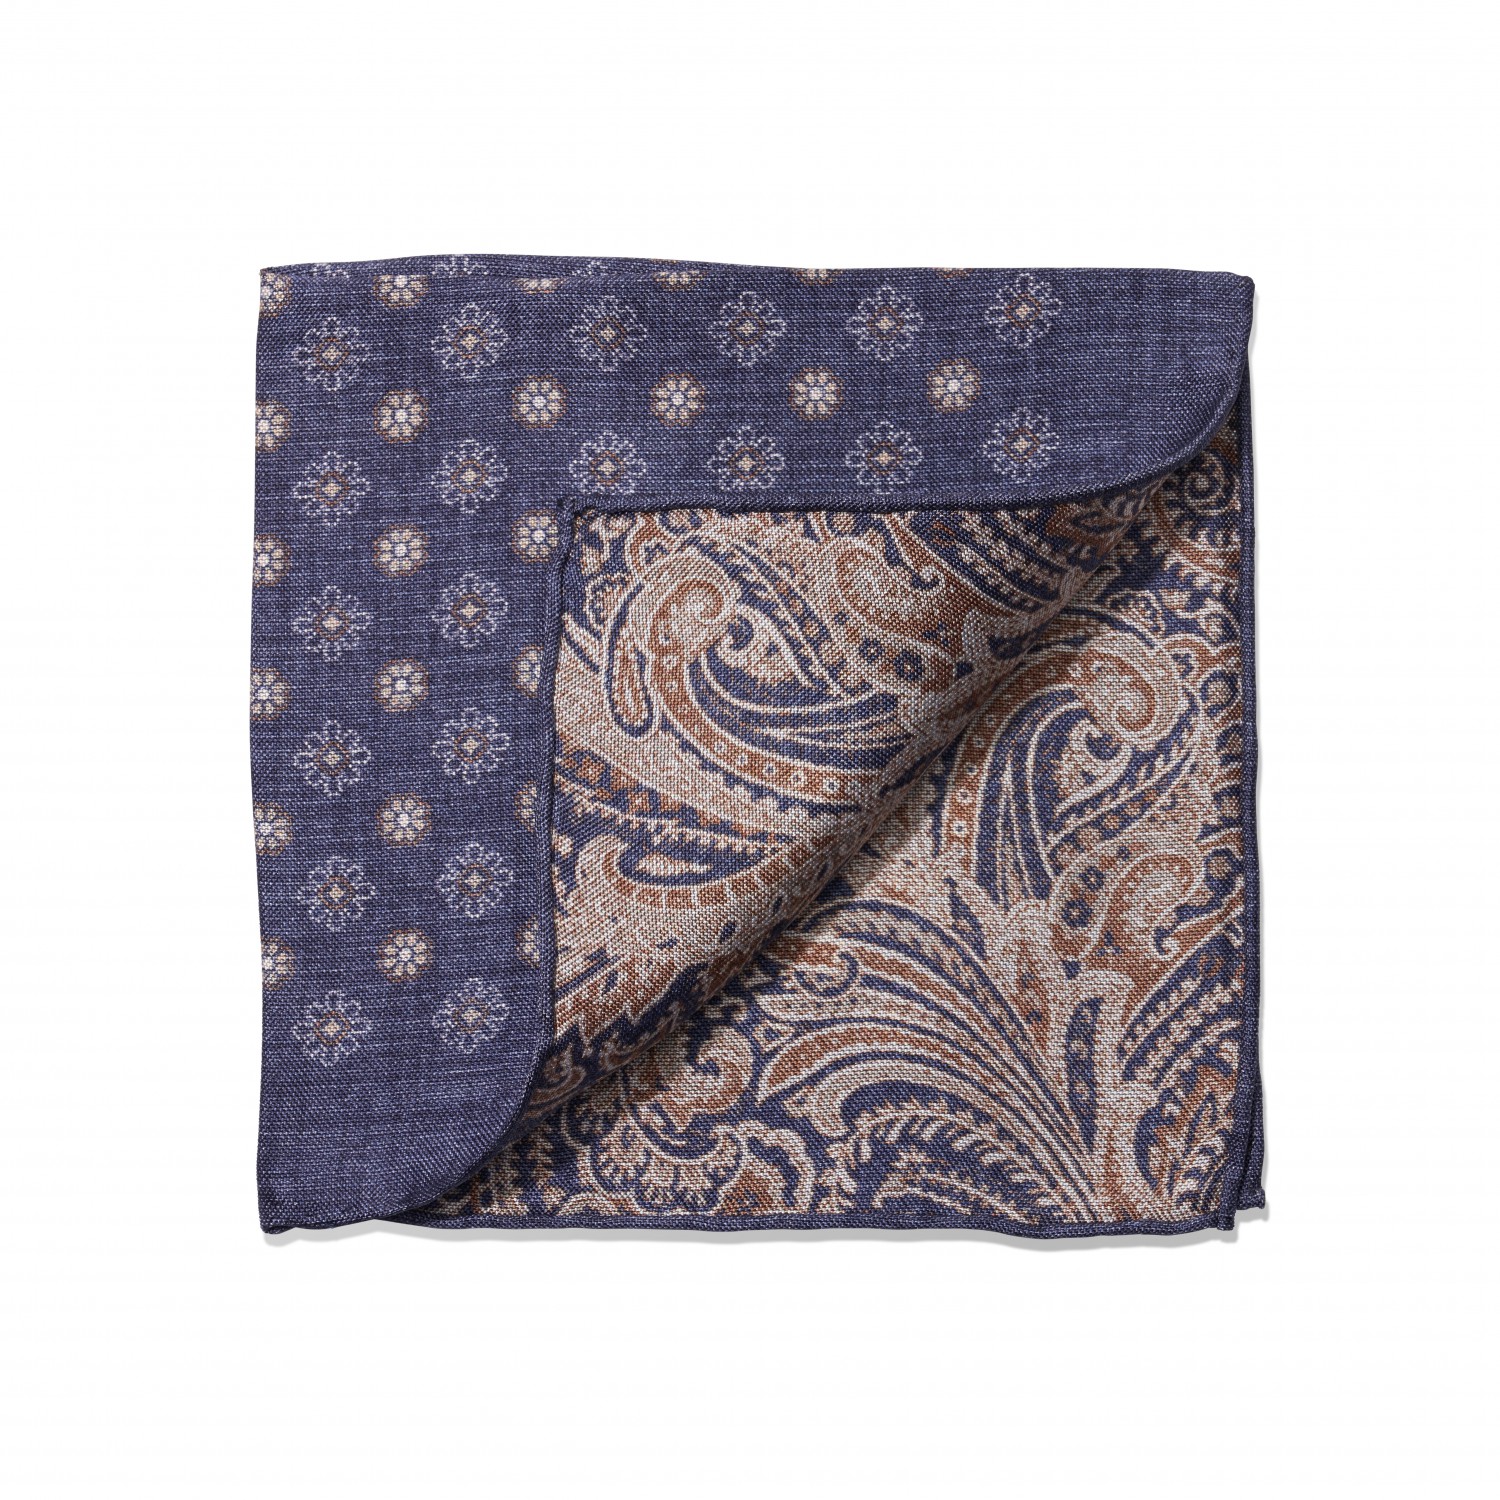 Blue, Tan & Ivory Floral and Paisley Double Sided Pocket Square